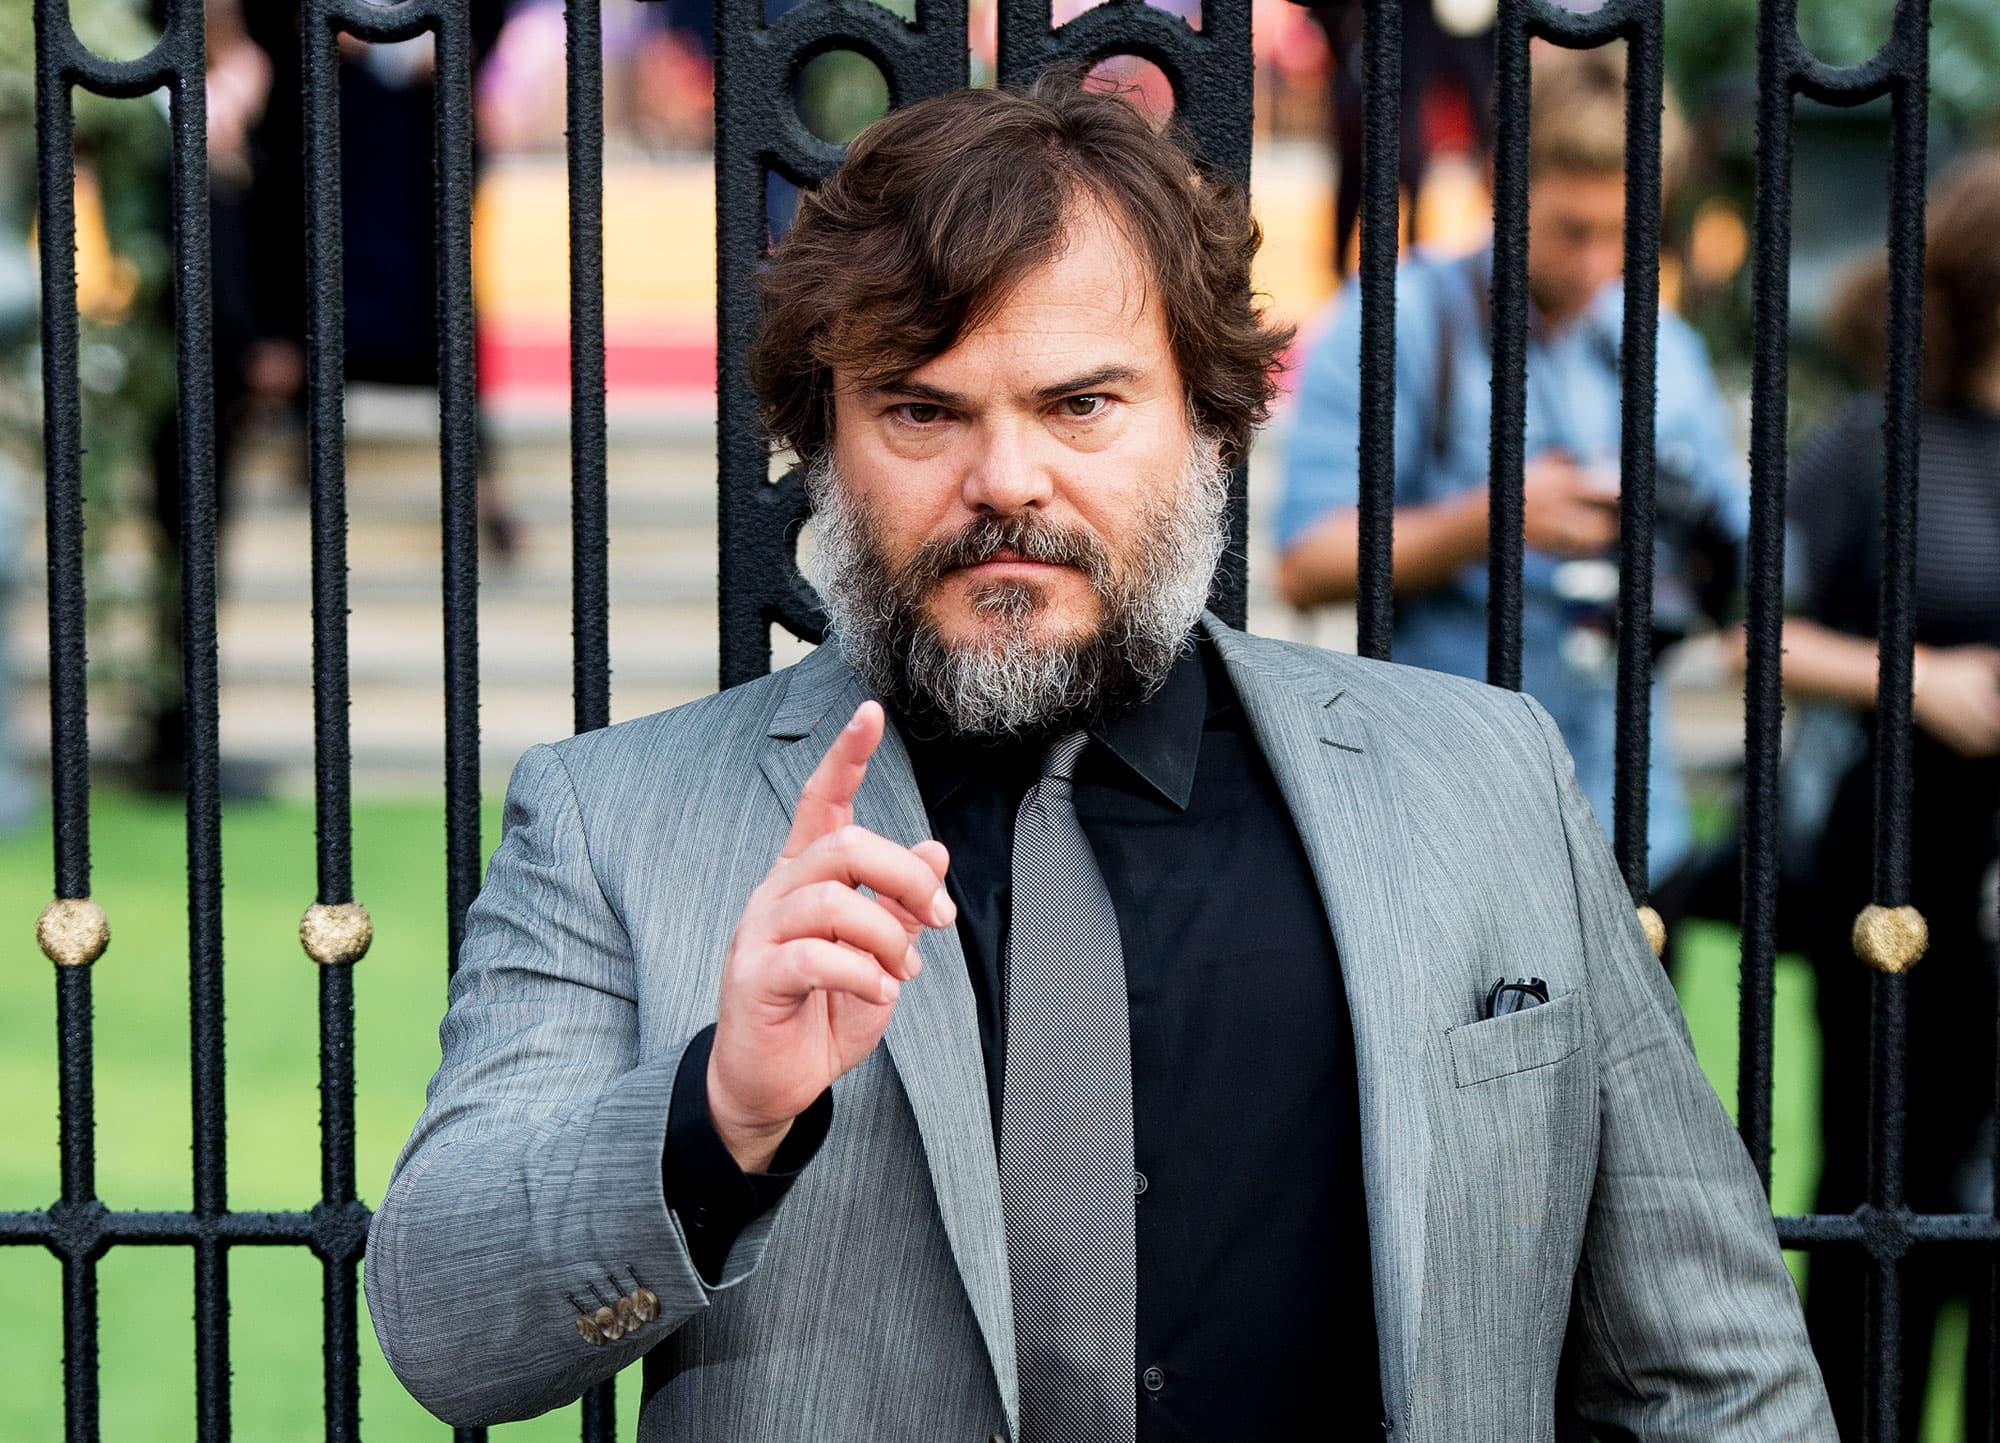 Top 10 All Time Best Jack Black Movies You Must Watch In 2021